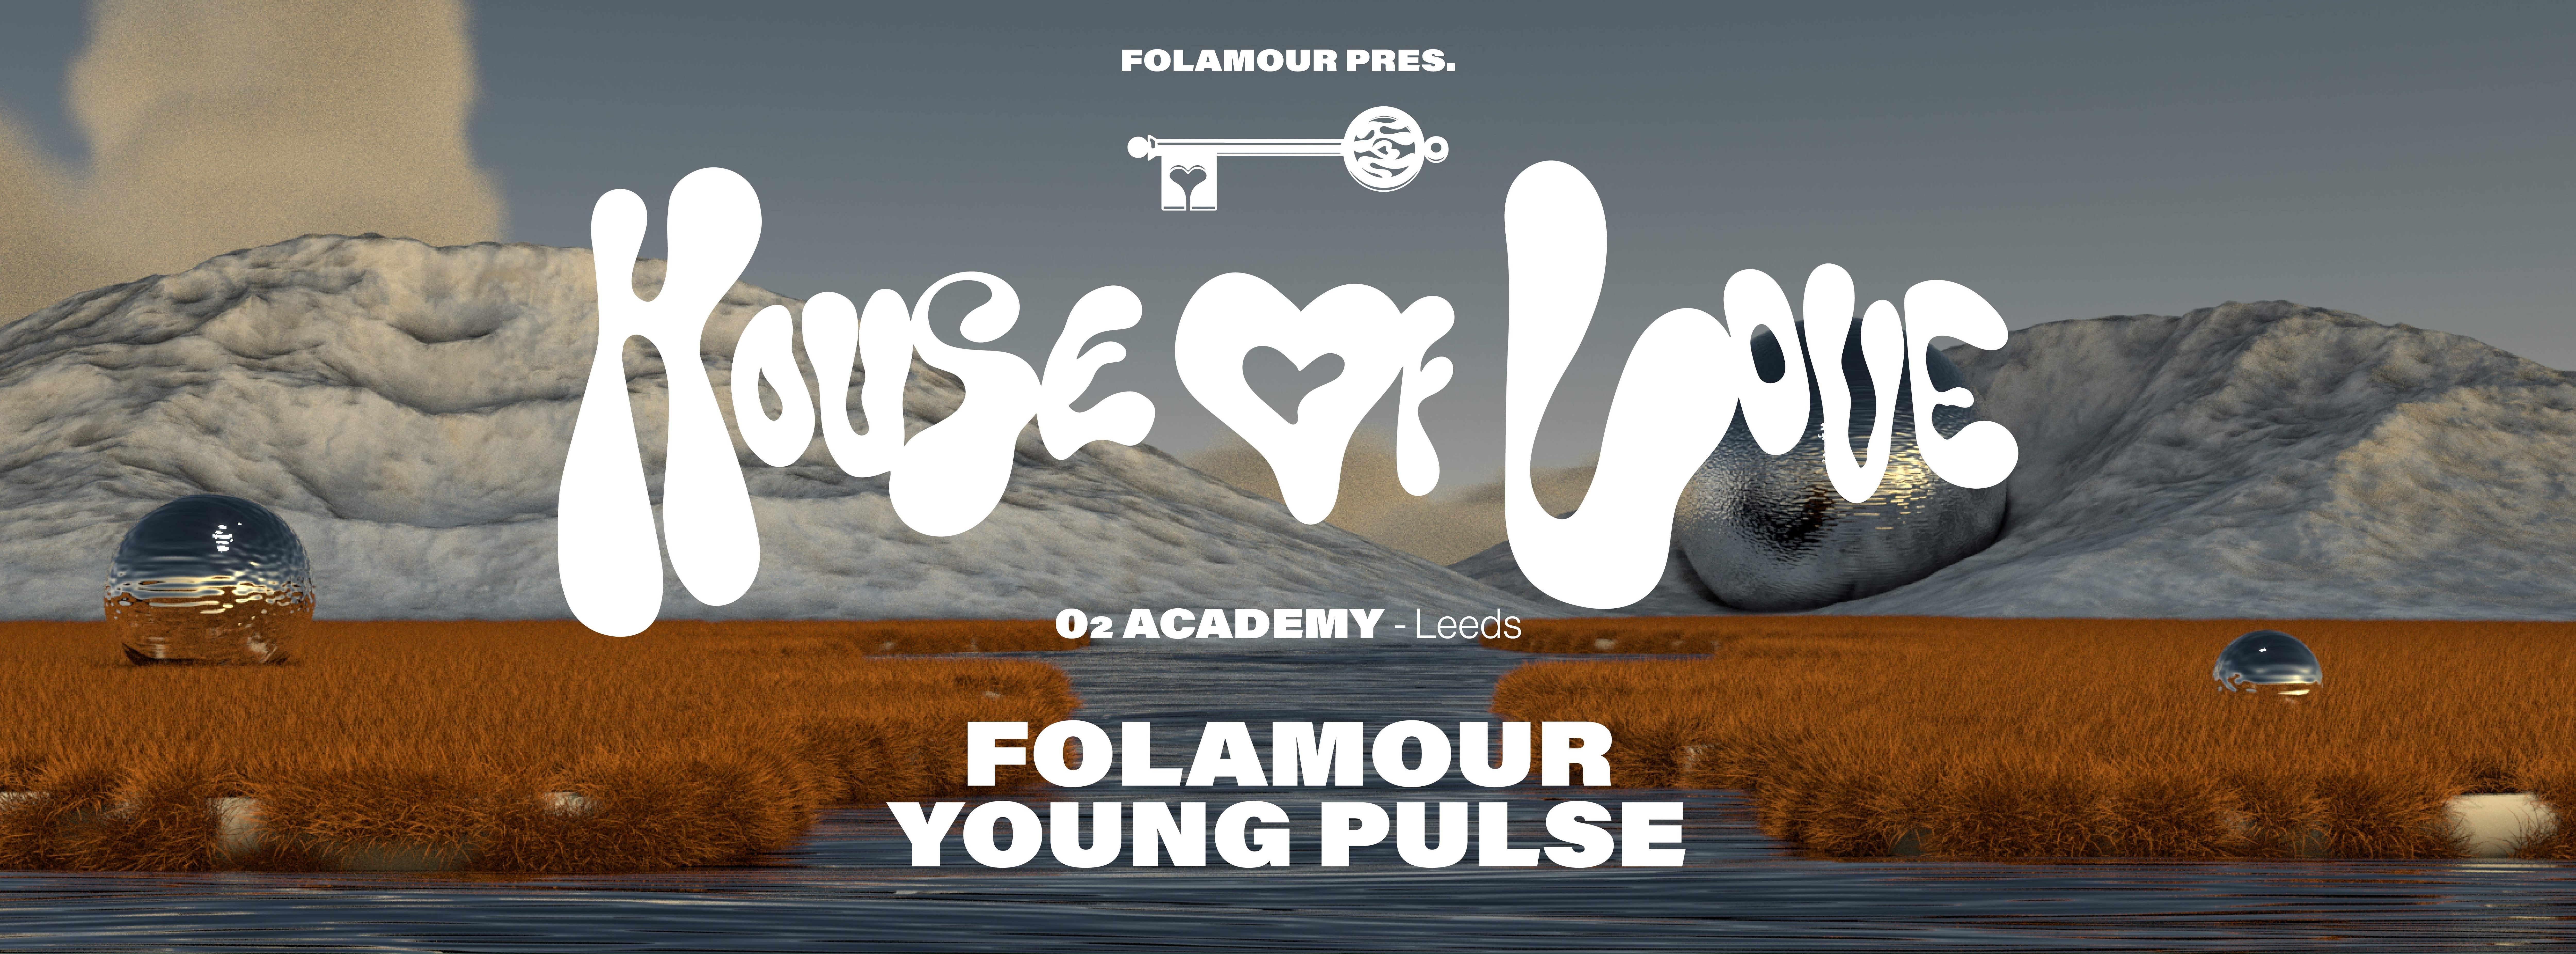 Folamour presents House of Love, Leeds - フライヤー表